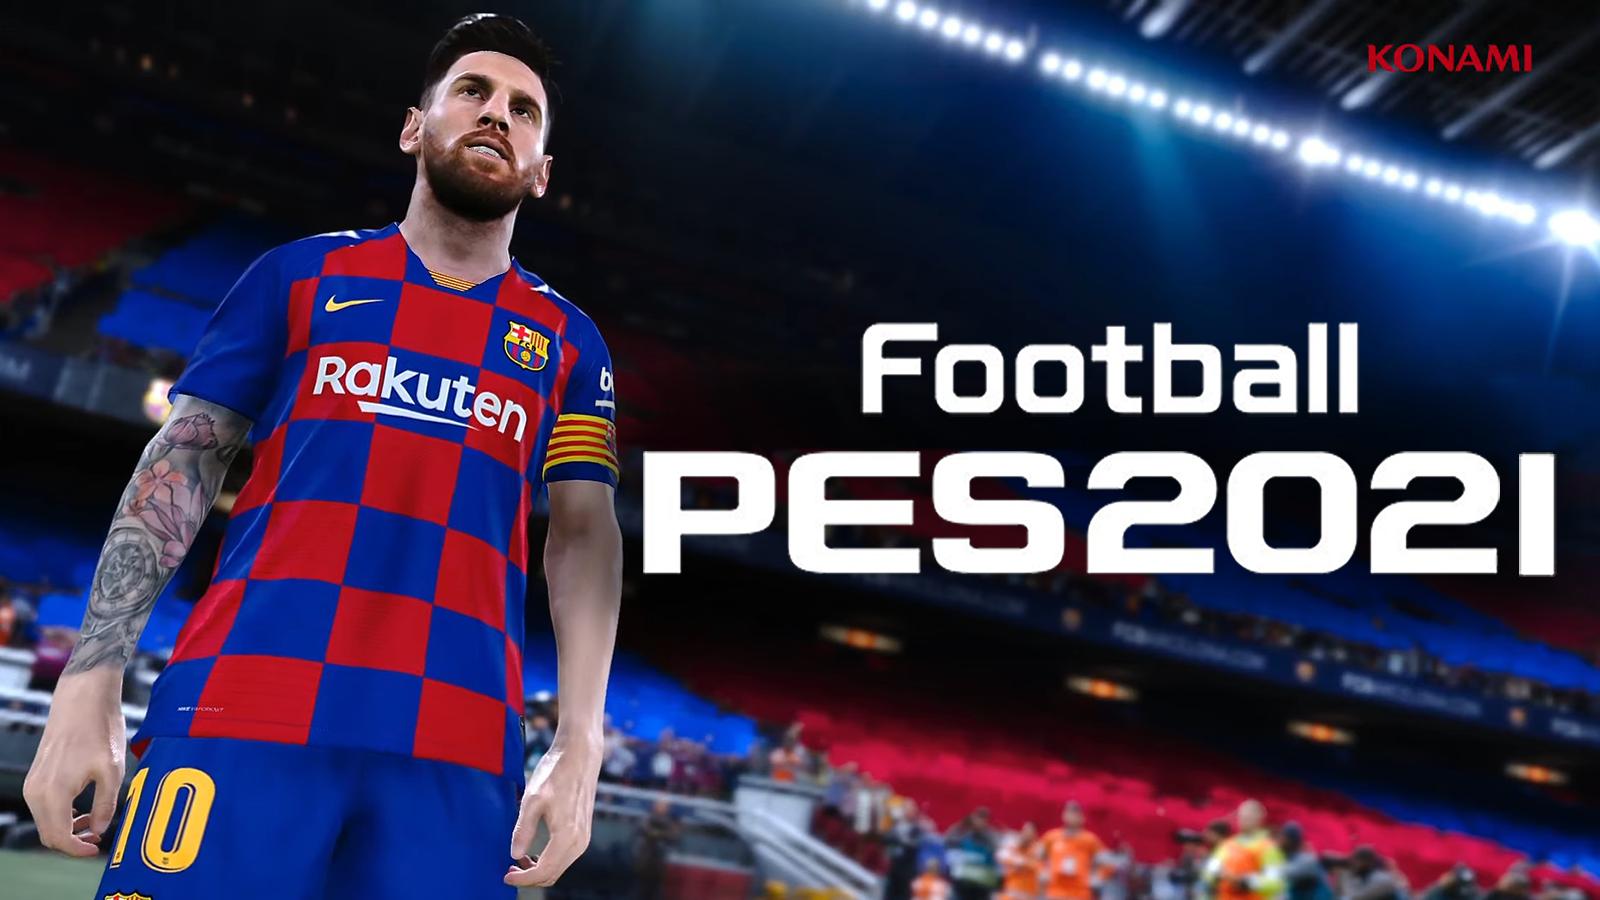 Barcelona superstar Lionel Messi is expected to appear on the cover of PES 2021 as part of his club's four-year deal.